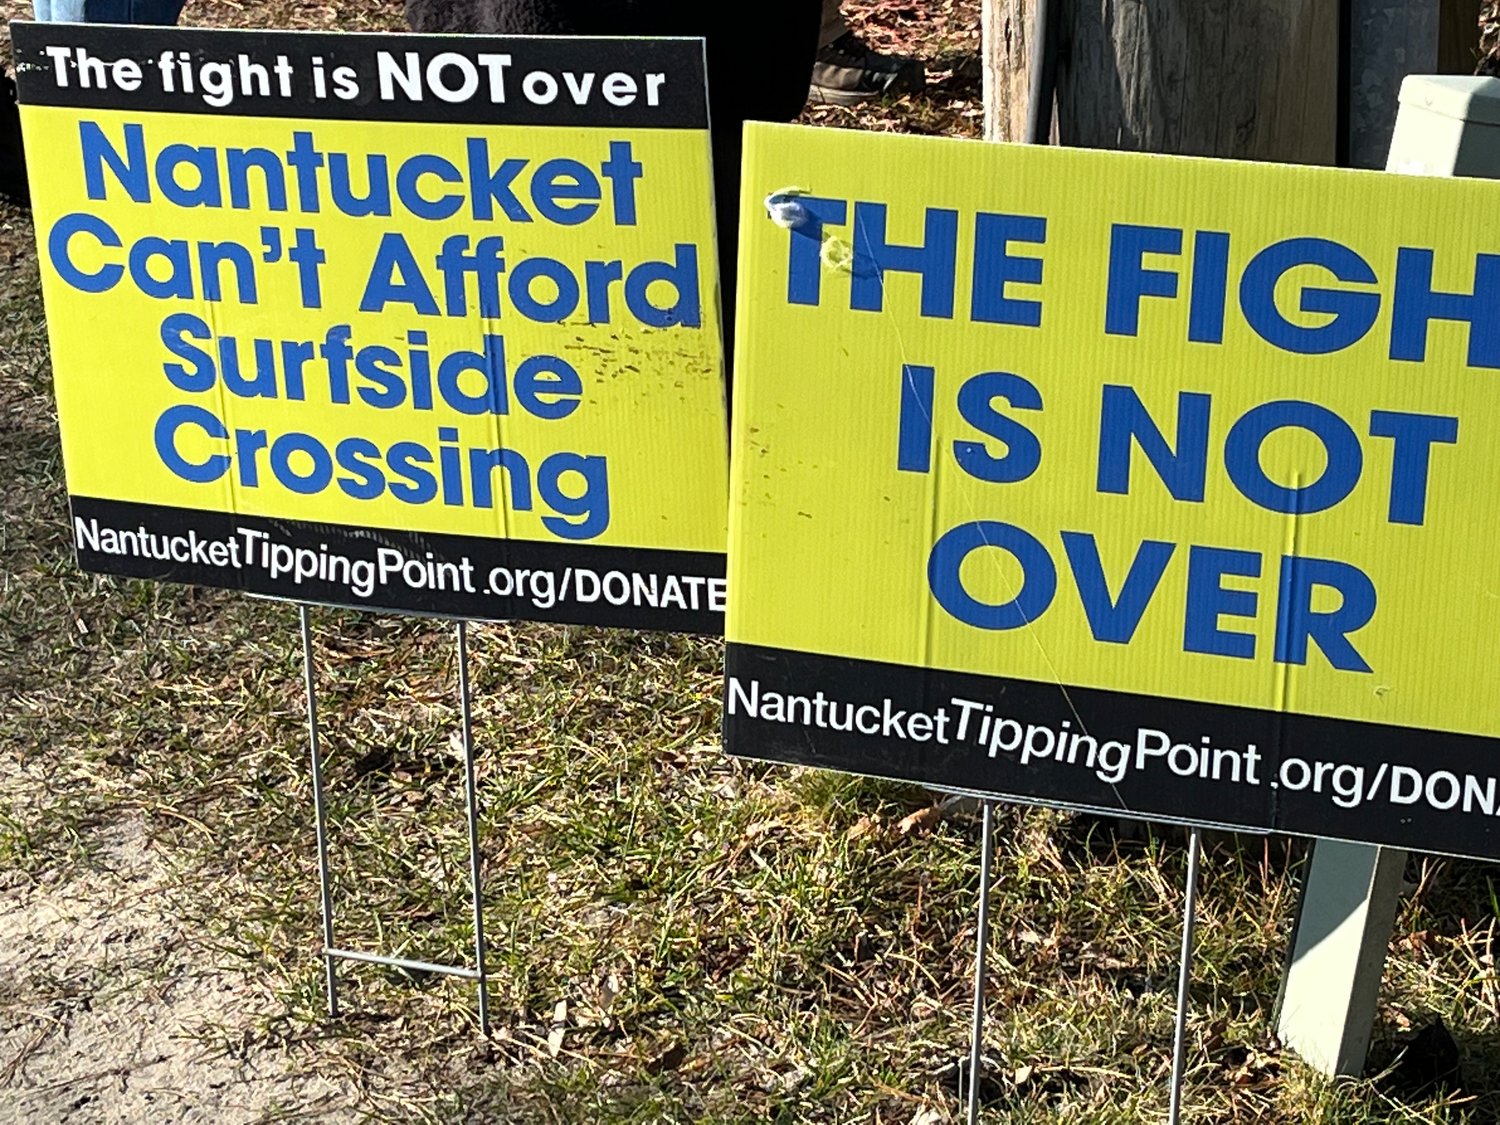 Opposition signs from Nantucket Tipping Point just outside the property Saturday morning.